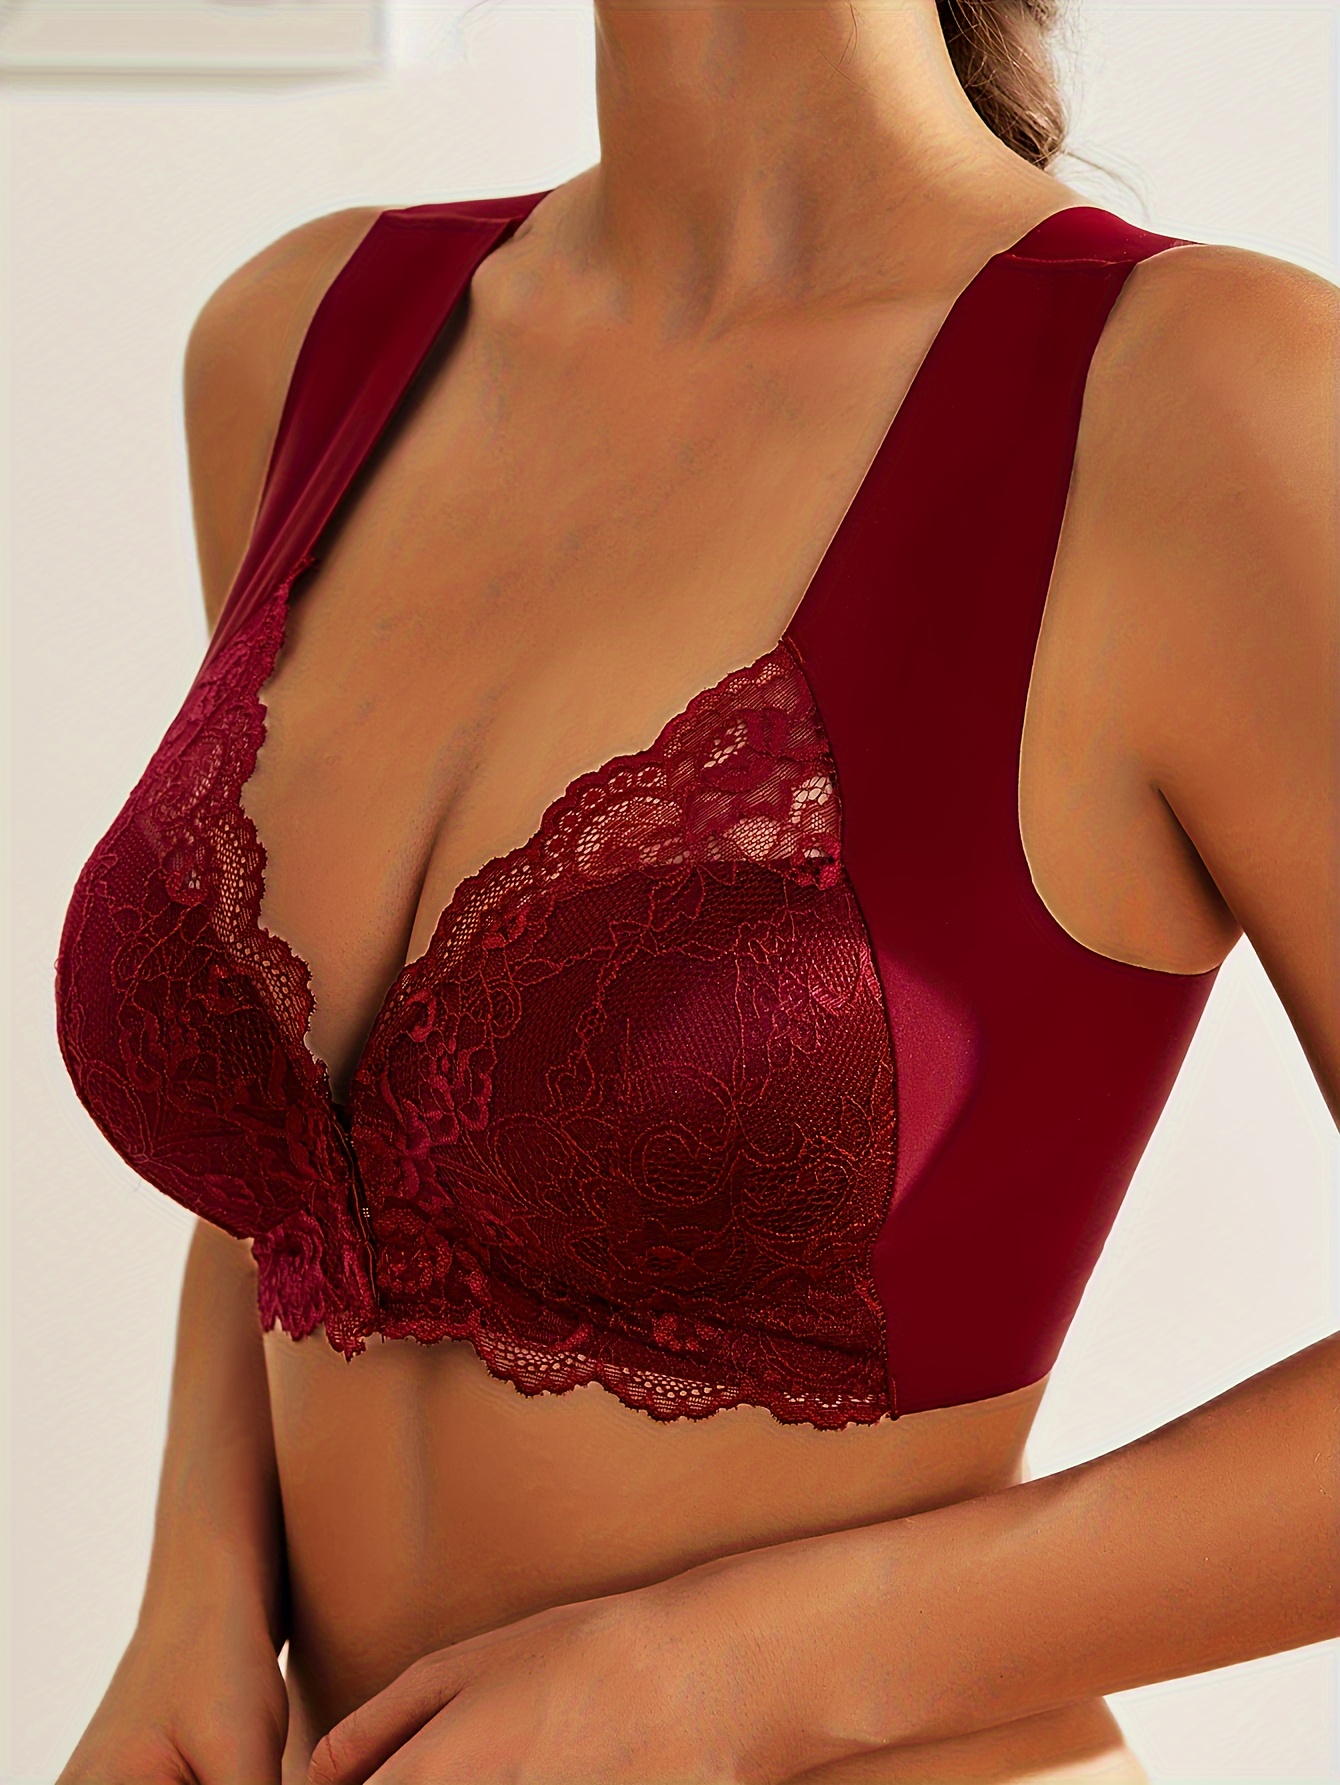 Tohuu Front Close Bras Lace Wire Free Bras for Middle Aged Women